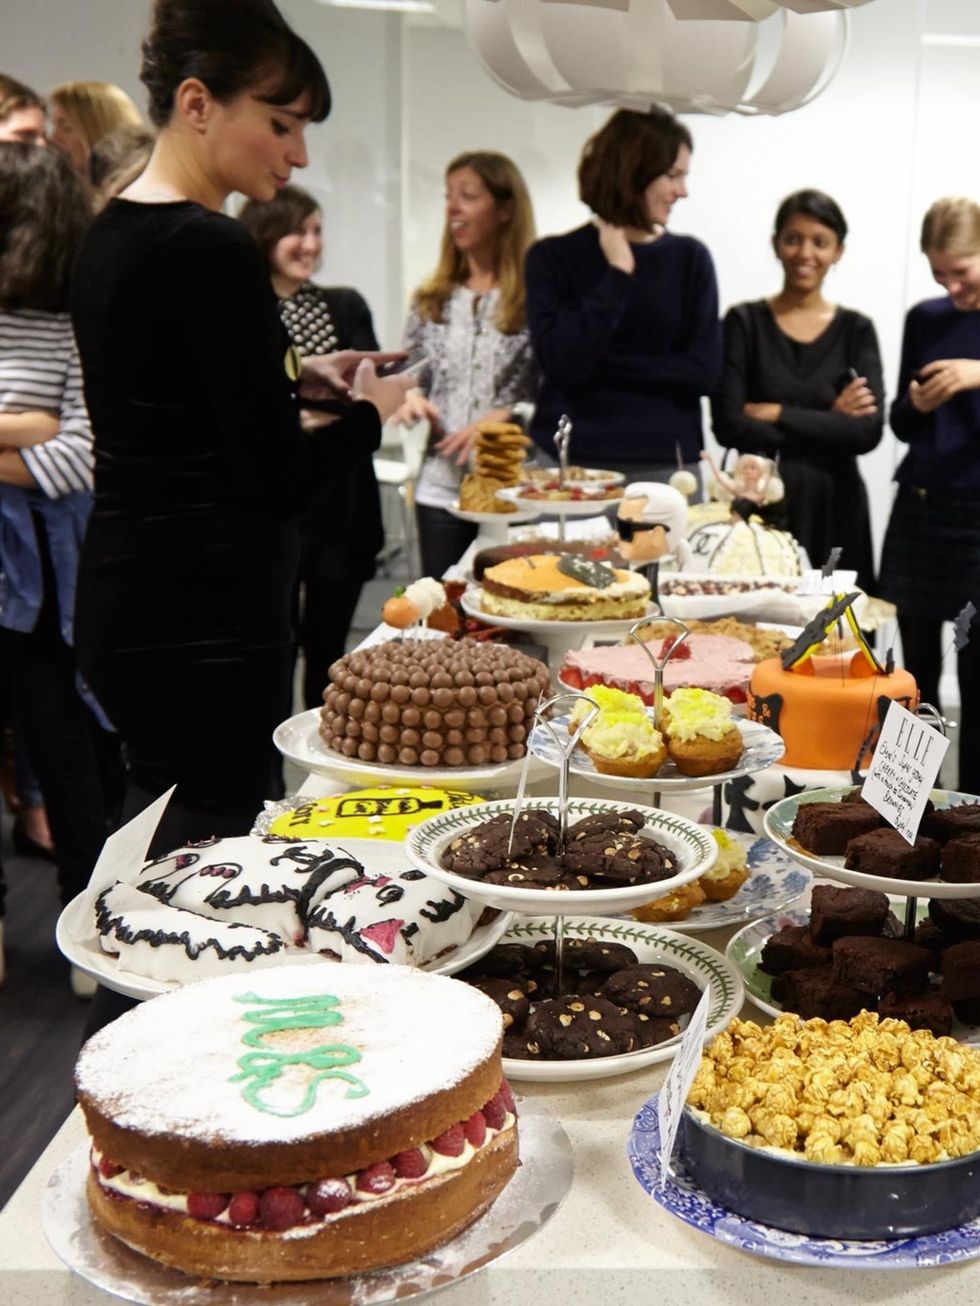 <p>Cakey-bakey fun was had by all at ELLE HQ on Wednesday. <a href="http://www.elleuk.com/star-style/news/the-elle-fashion-bake-off-cake-gizzi-erskine-ruby-tandoh-frances-quinn">The ELLE Fashion Bake Off</a> was a triumphant showcase of cooking skills (a 